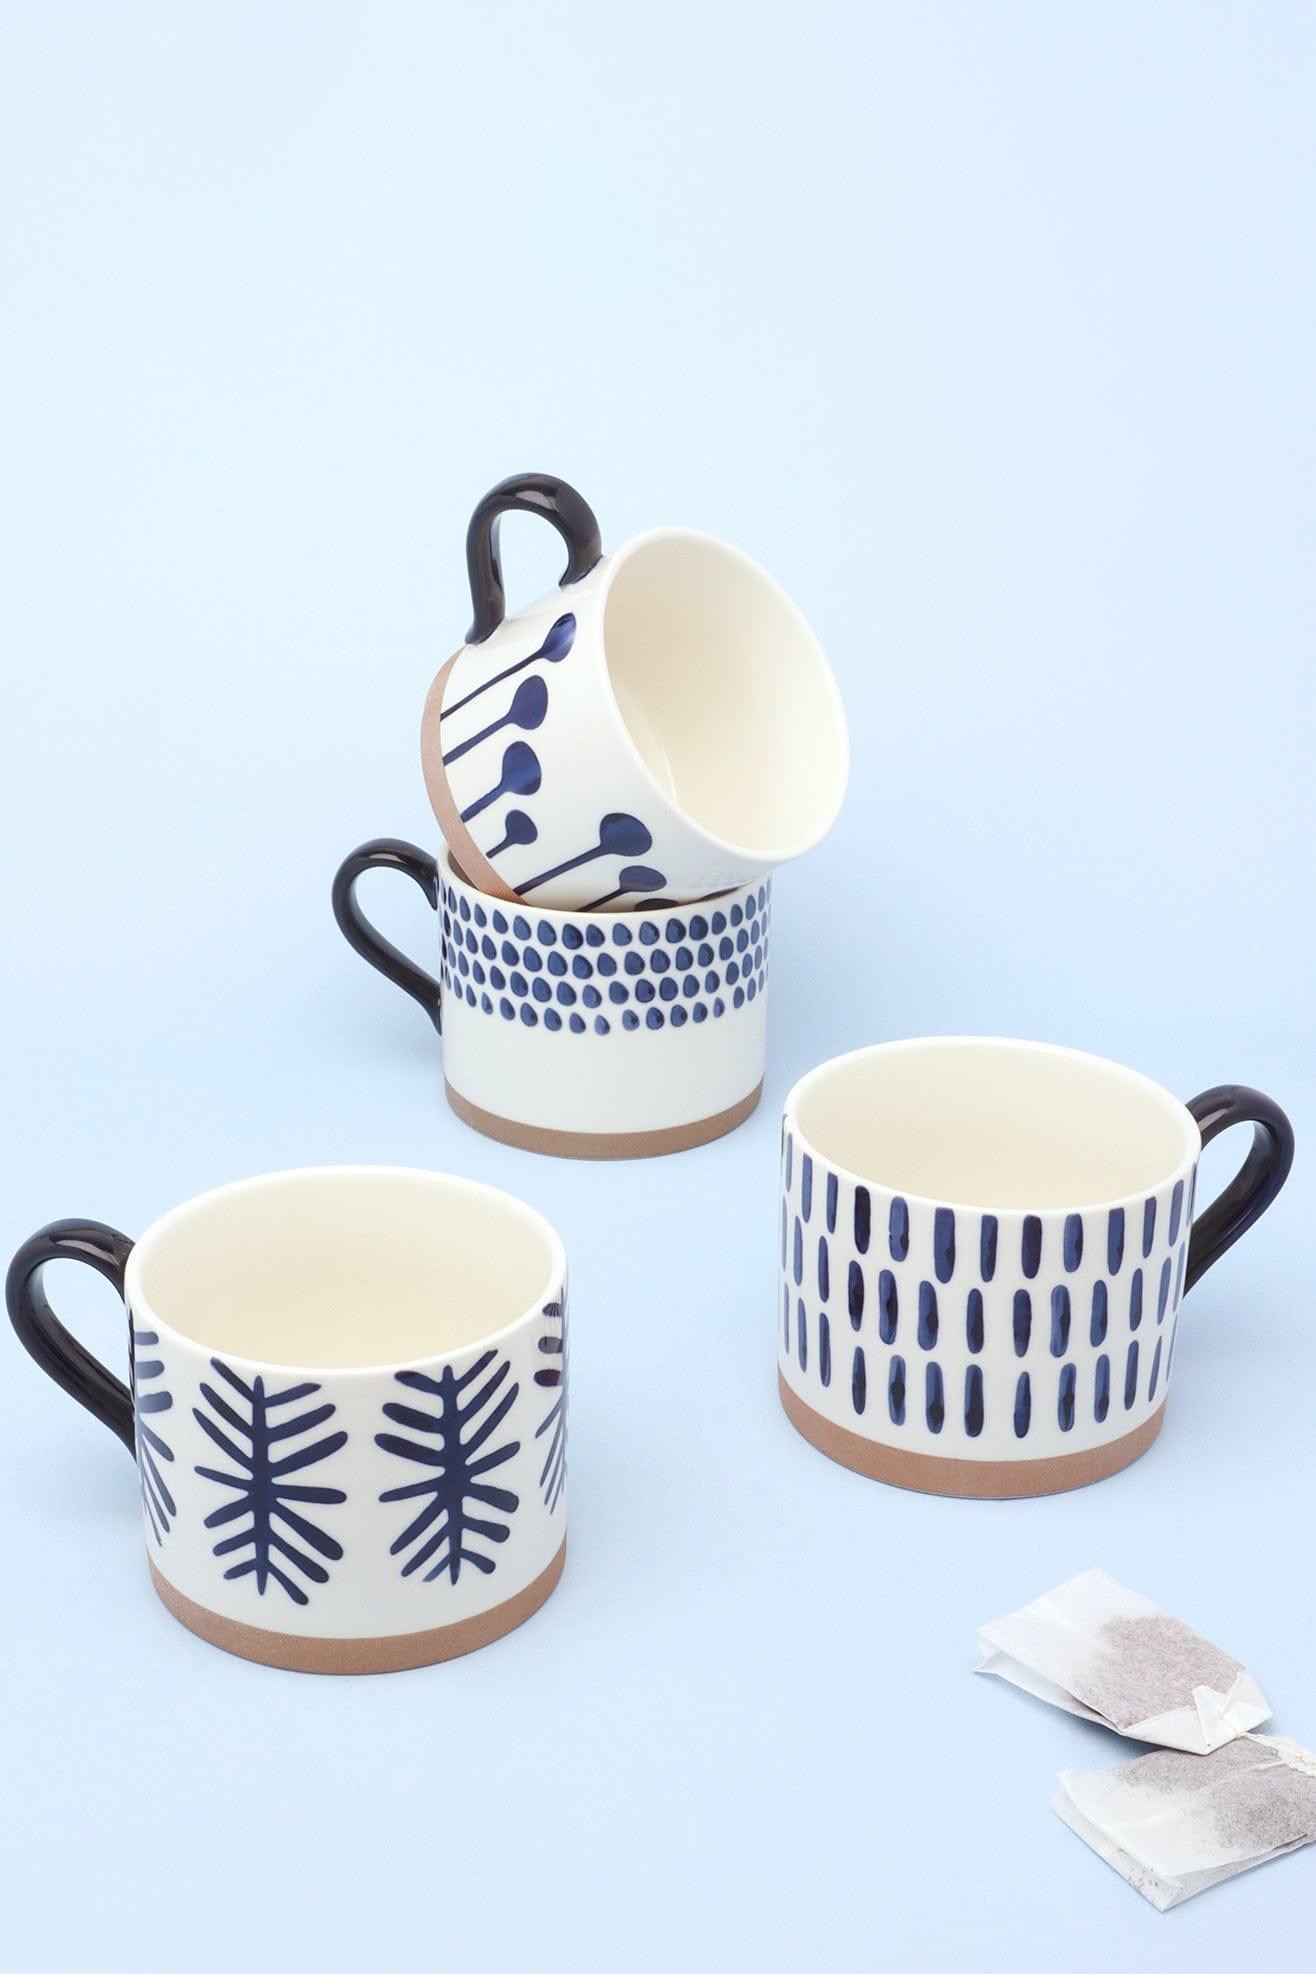 G Decor Mugs and Cups Set of Four Set Of Four Milo Ceramic Patterned Abstract Coffee Mug Cups